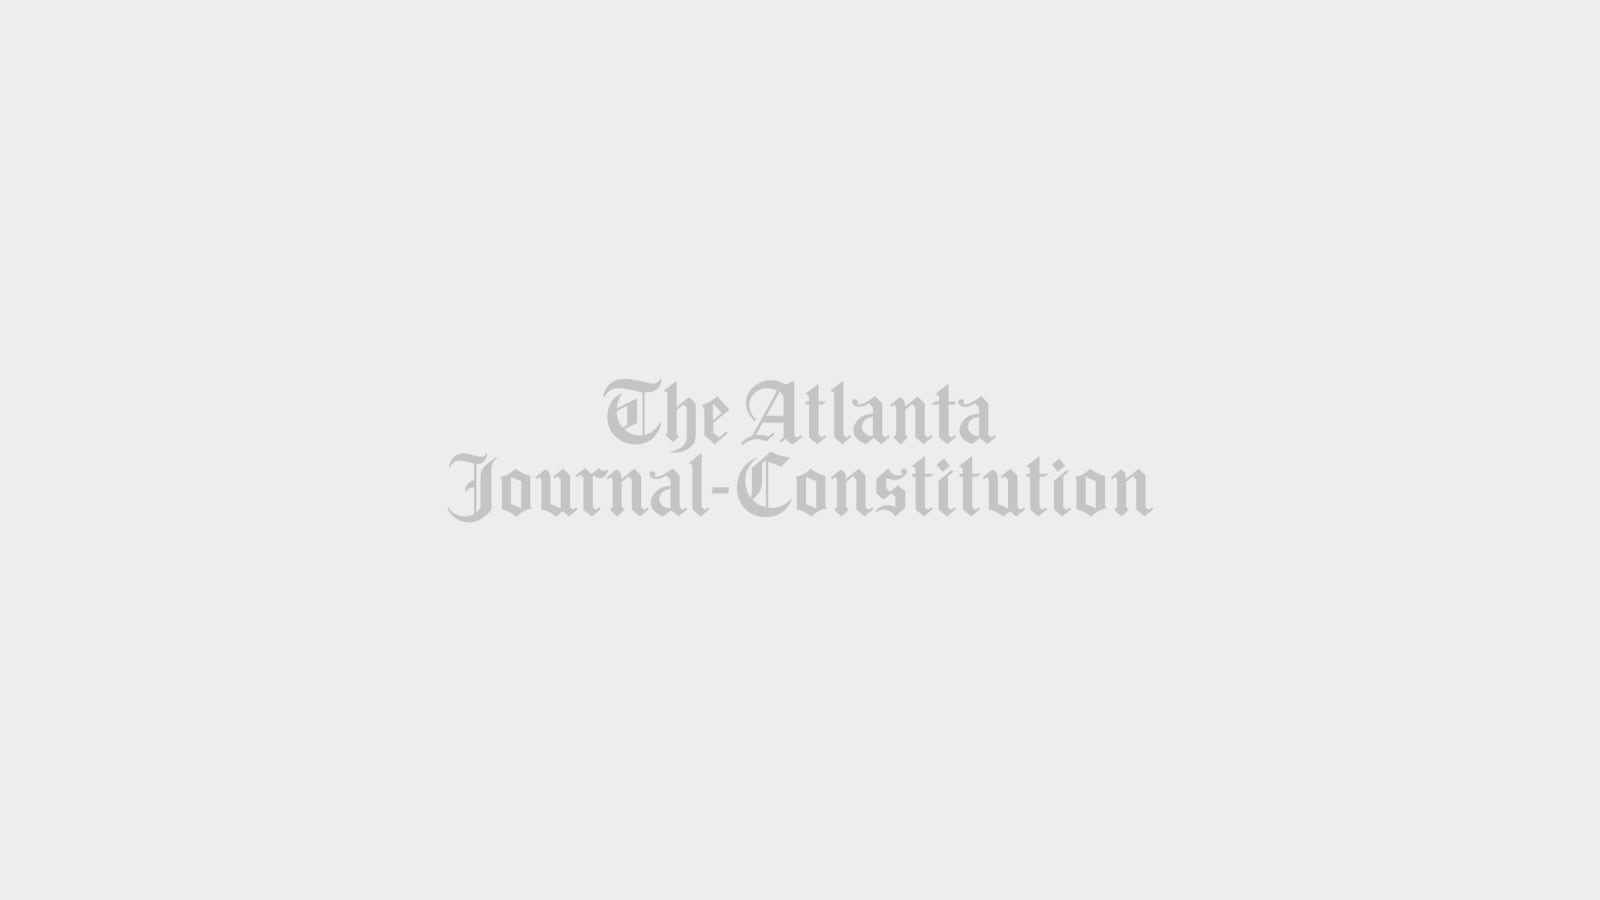 Atlanta-based Kabbage, an online lender, became heavily involved in Paycheck Protection Program loans in April 2020. The company is now known as K Servicing. STEVE SCHAEFER FOR THE ATLANTA JOURNAL-CONSTITUTION